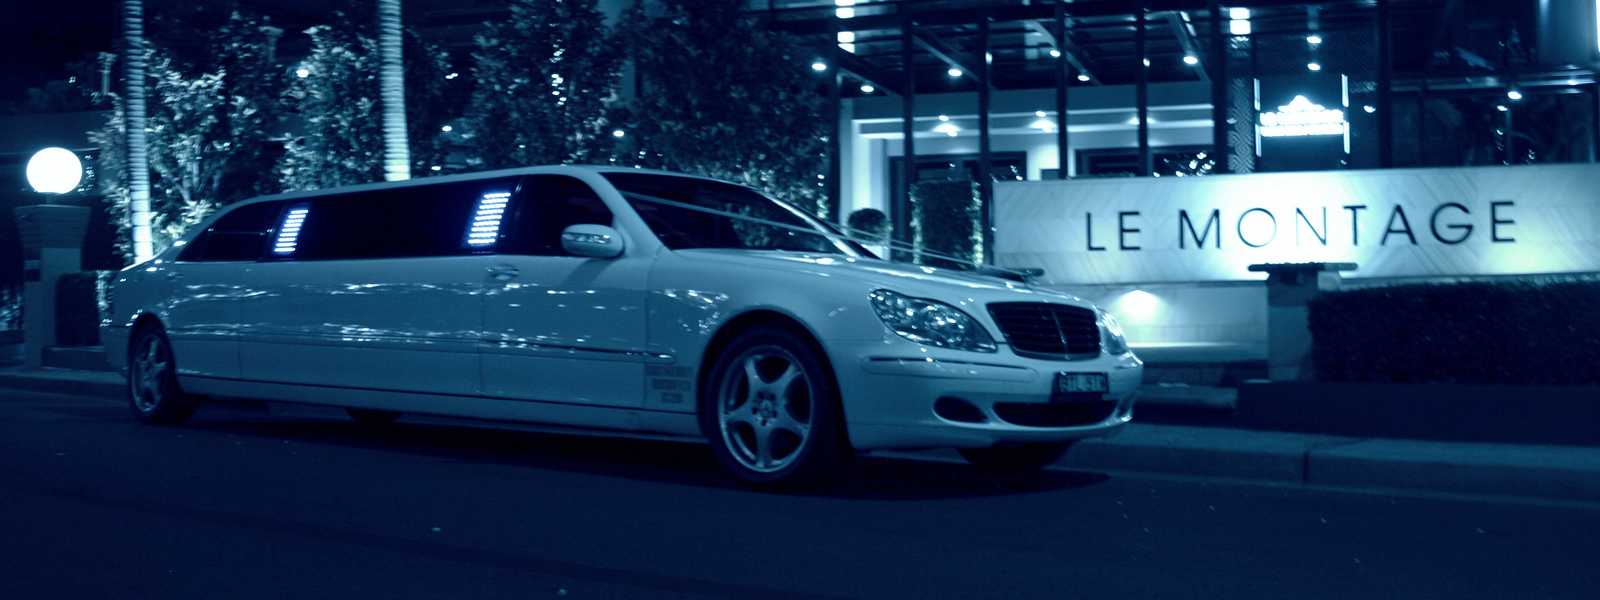 High-Quality Limousine Hire in Sydney